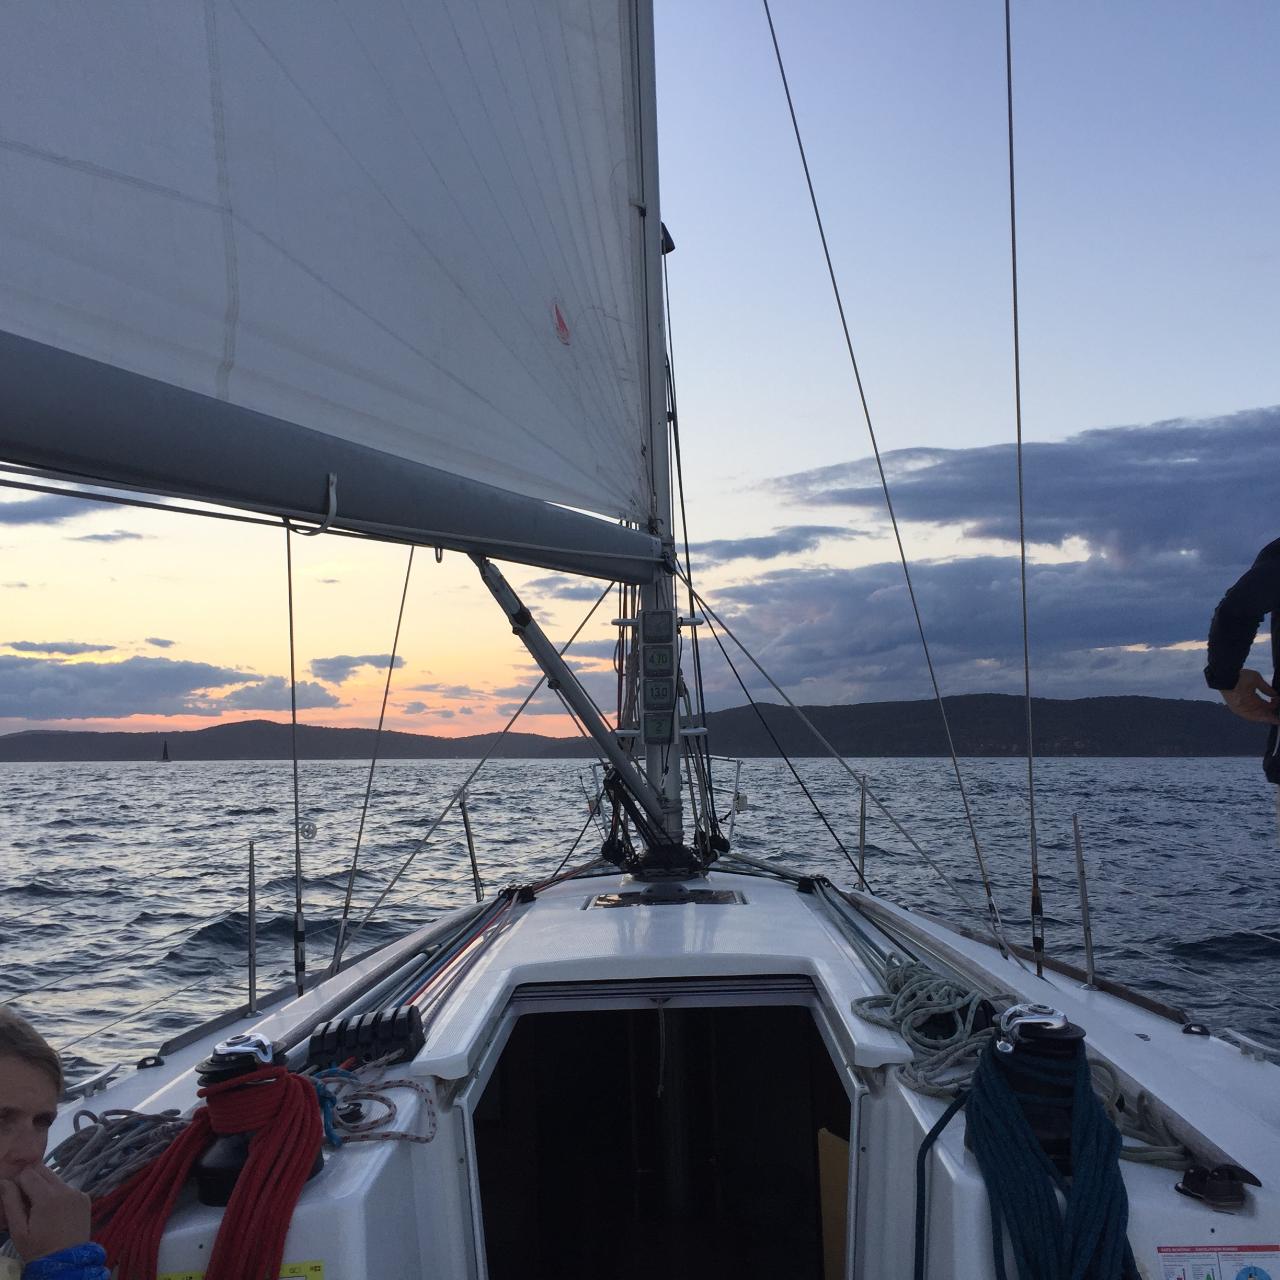 RYA 5 Day Course - Competent Crew or Day Skipper